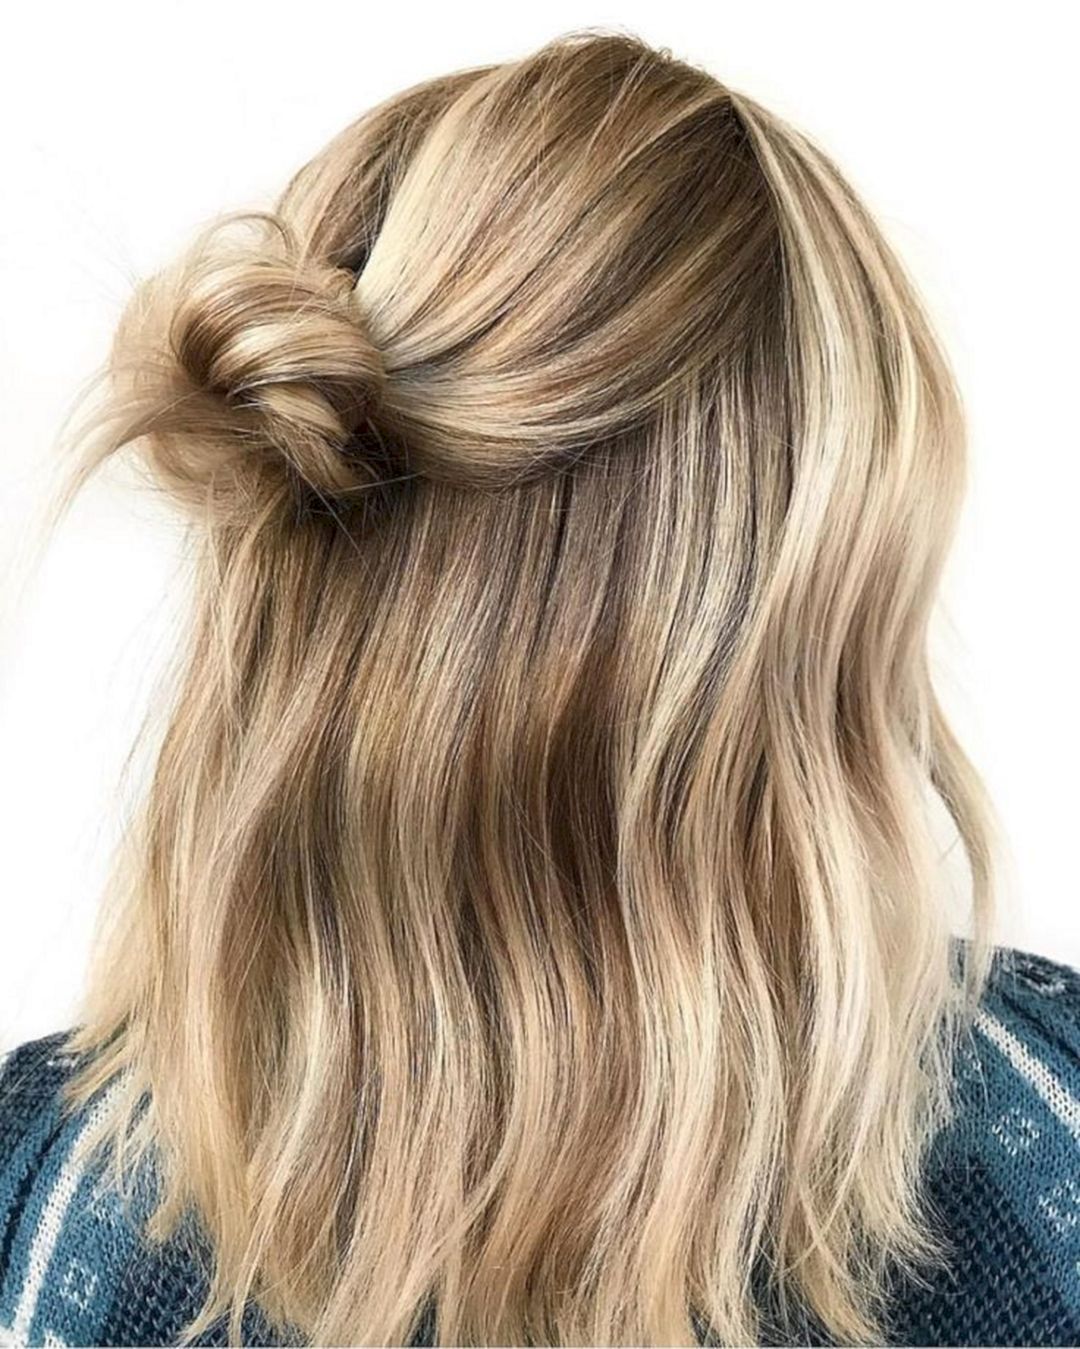 Half updo balayage hairstyles from theeverygirl